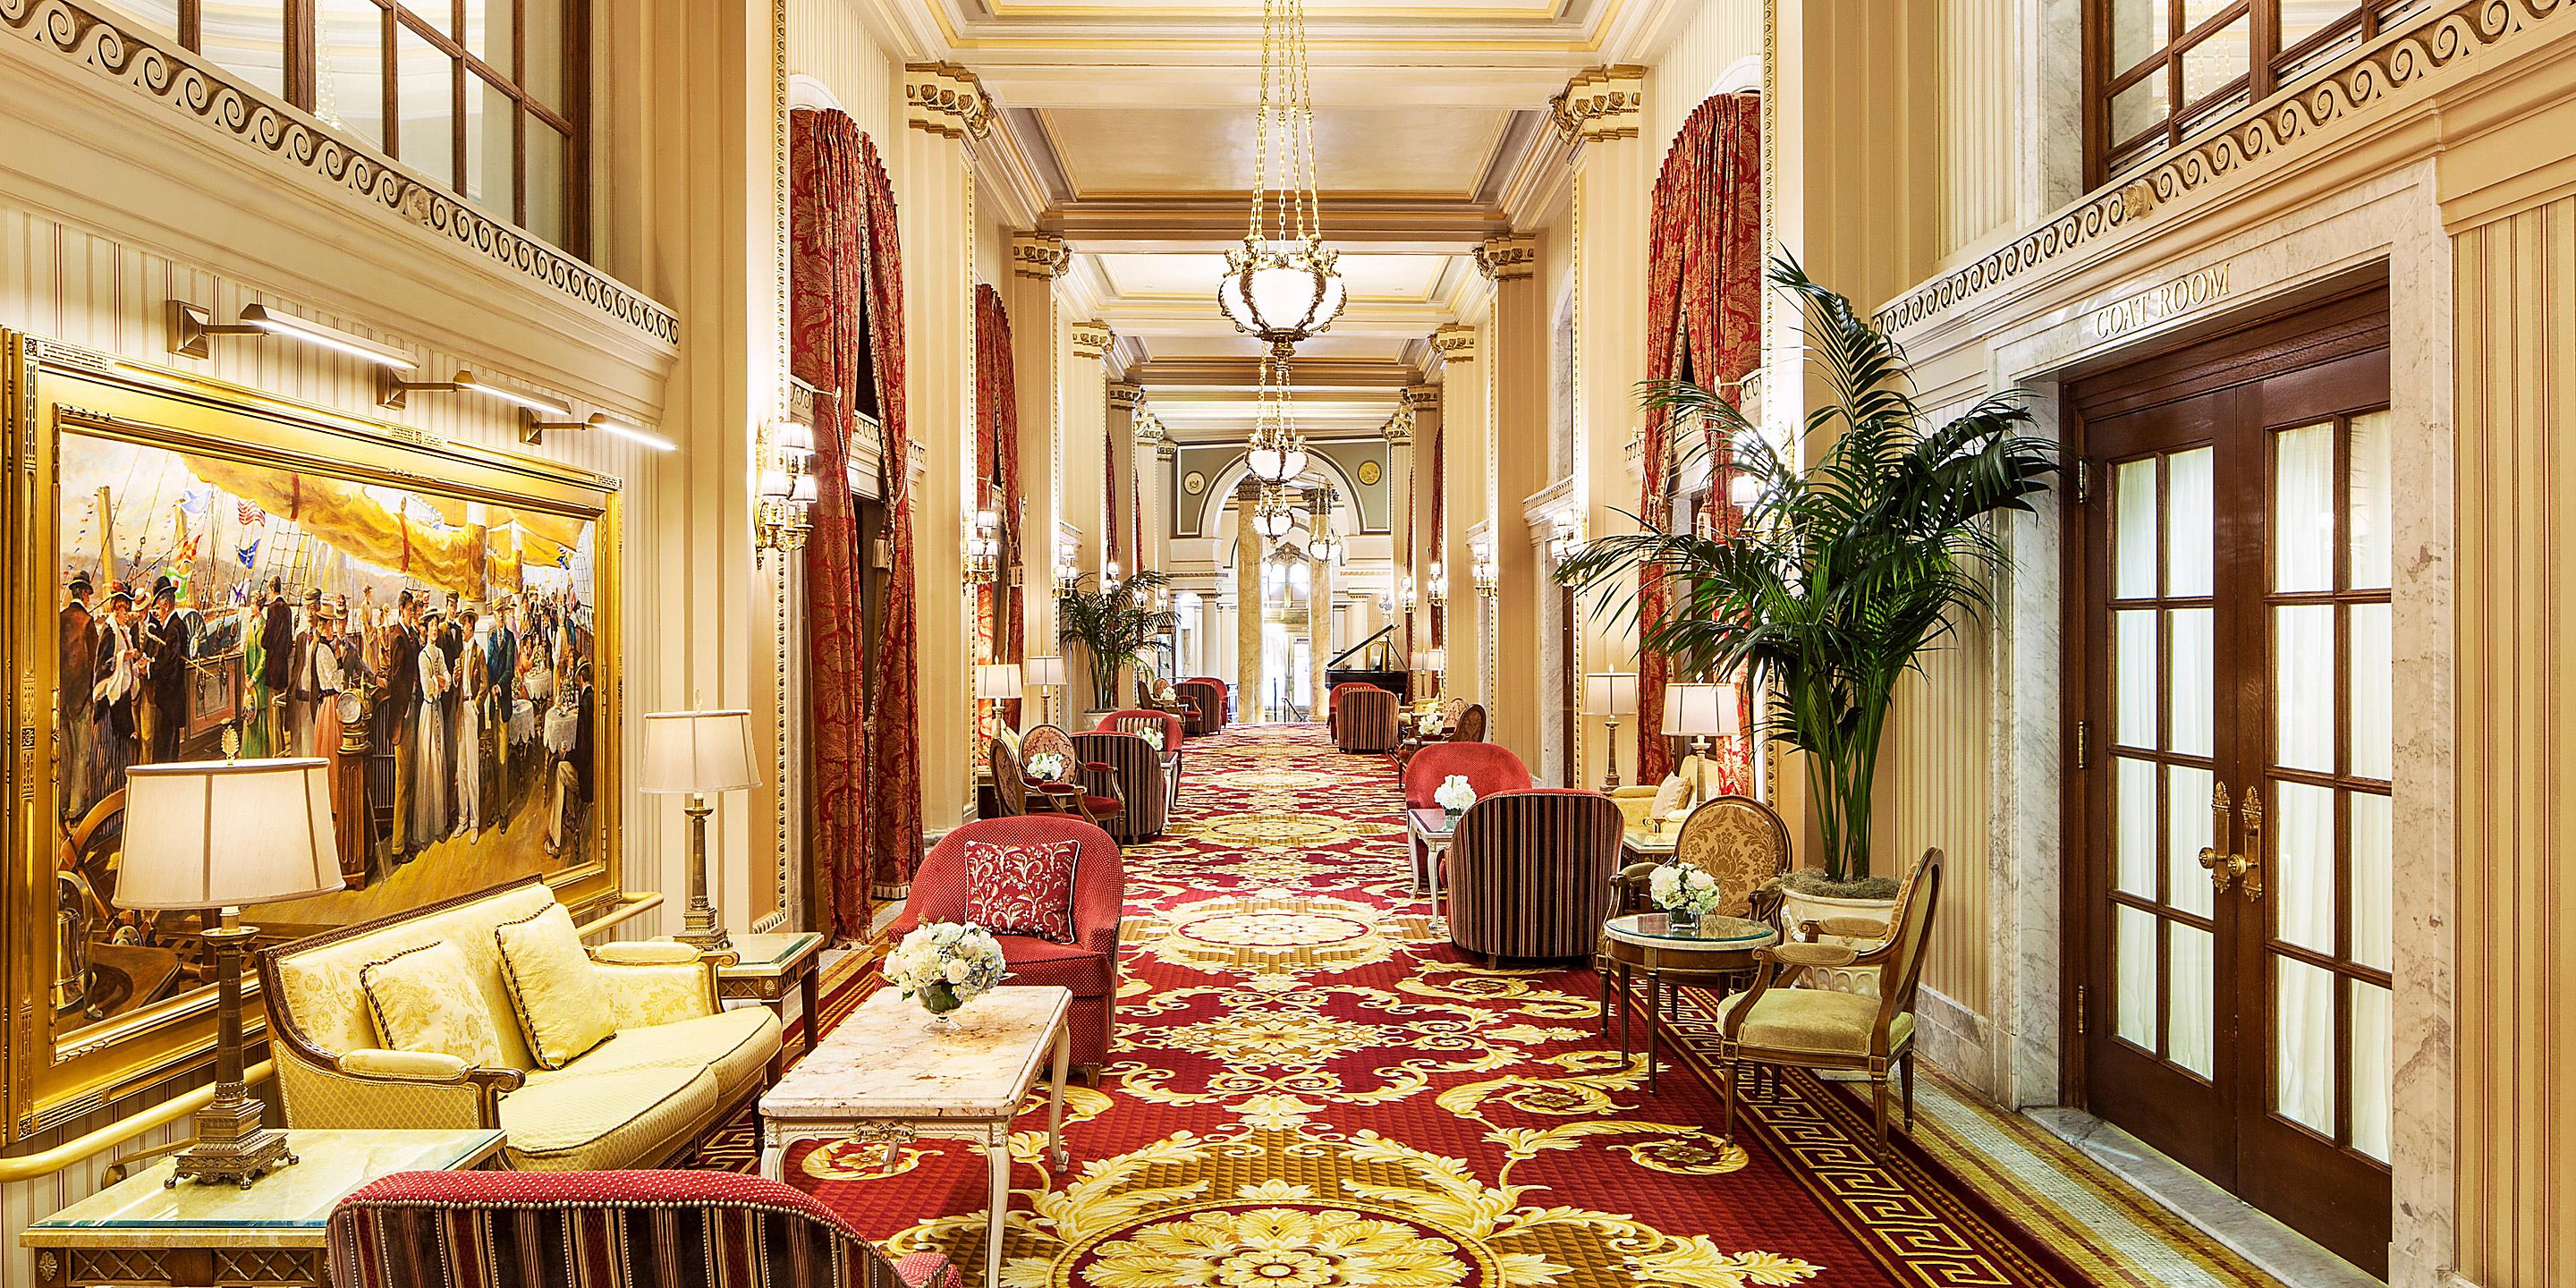 Stroll the gilded halls of The Willard, including Peacock Alley.